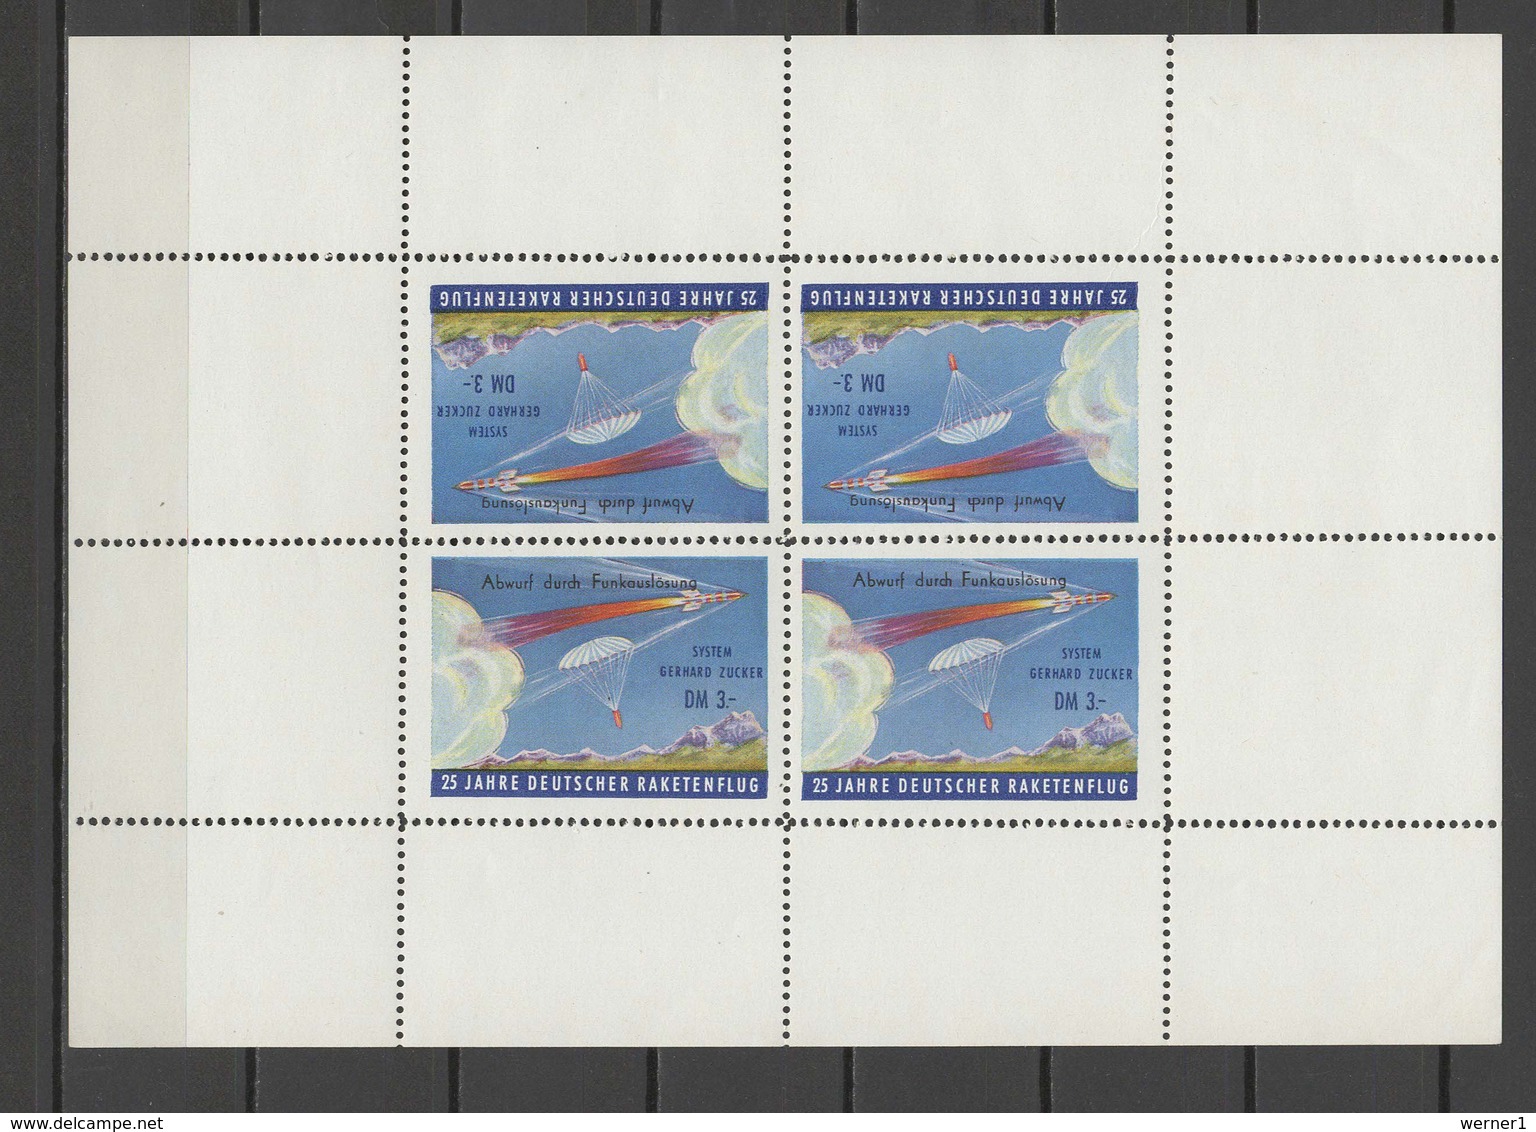 Germany 1961 Space, Rocket Mail Vignette With Overprint "Abwurf Durch Funkauslösung" MNH - Europe